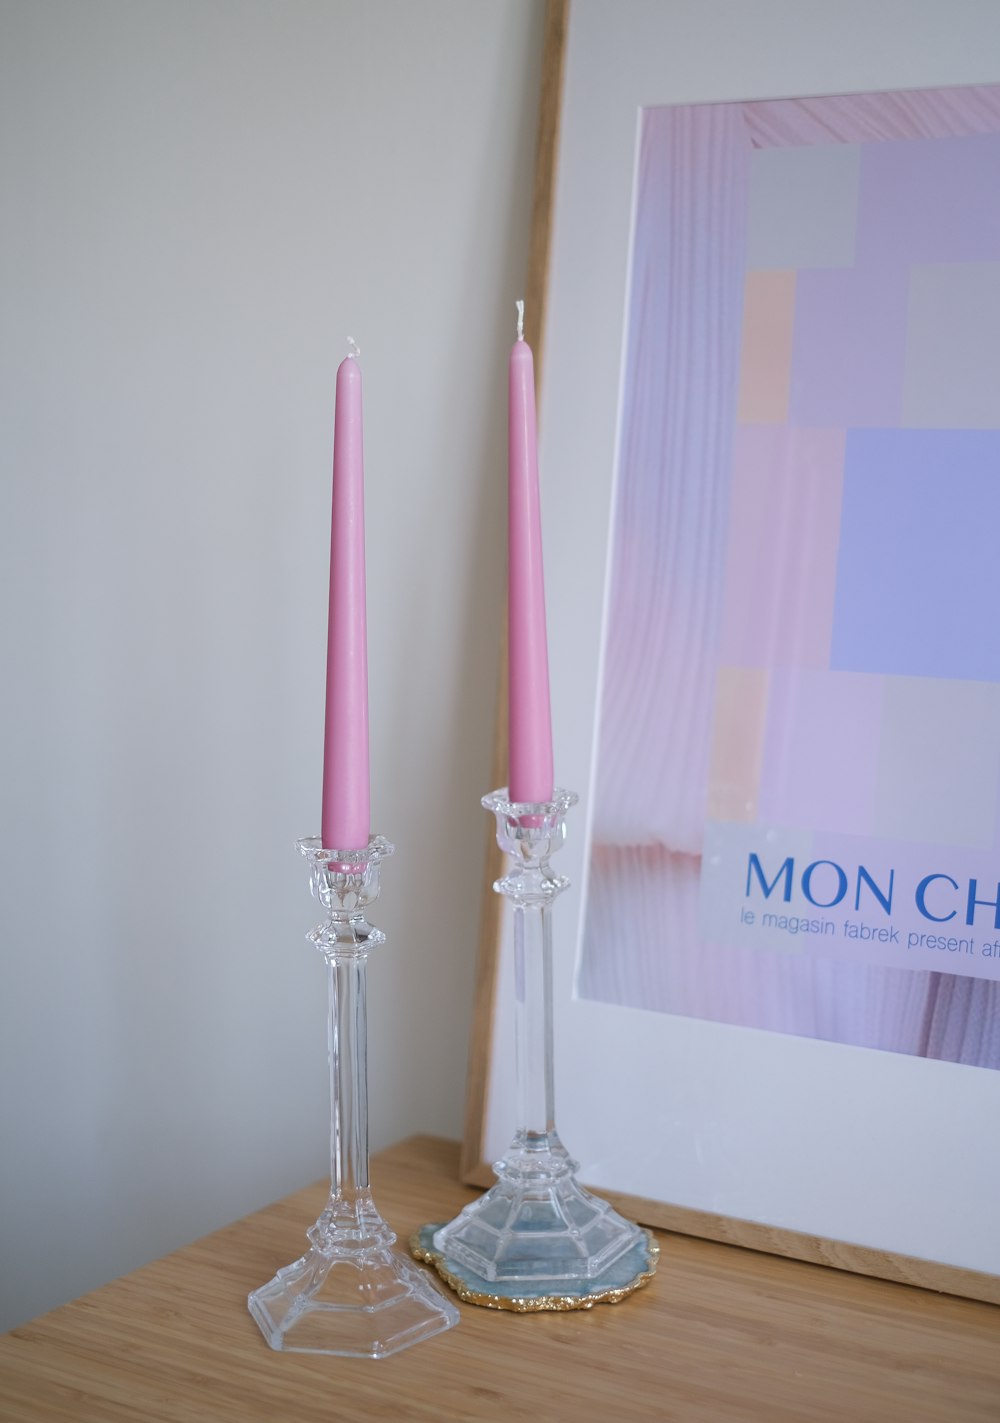 2 white and pink candles on clear glass candle holder